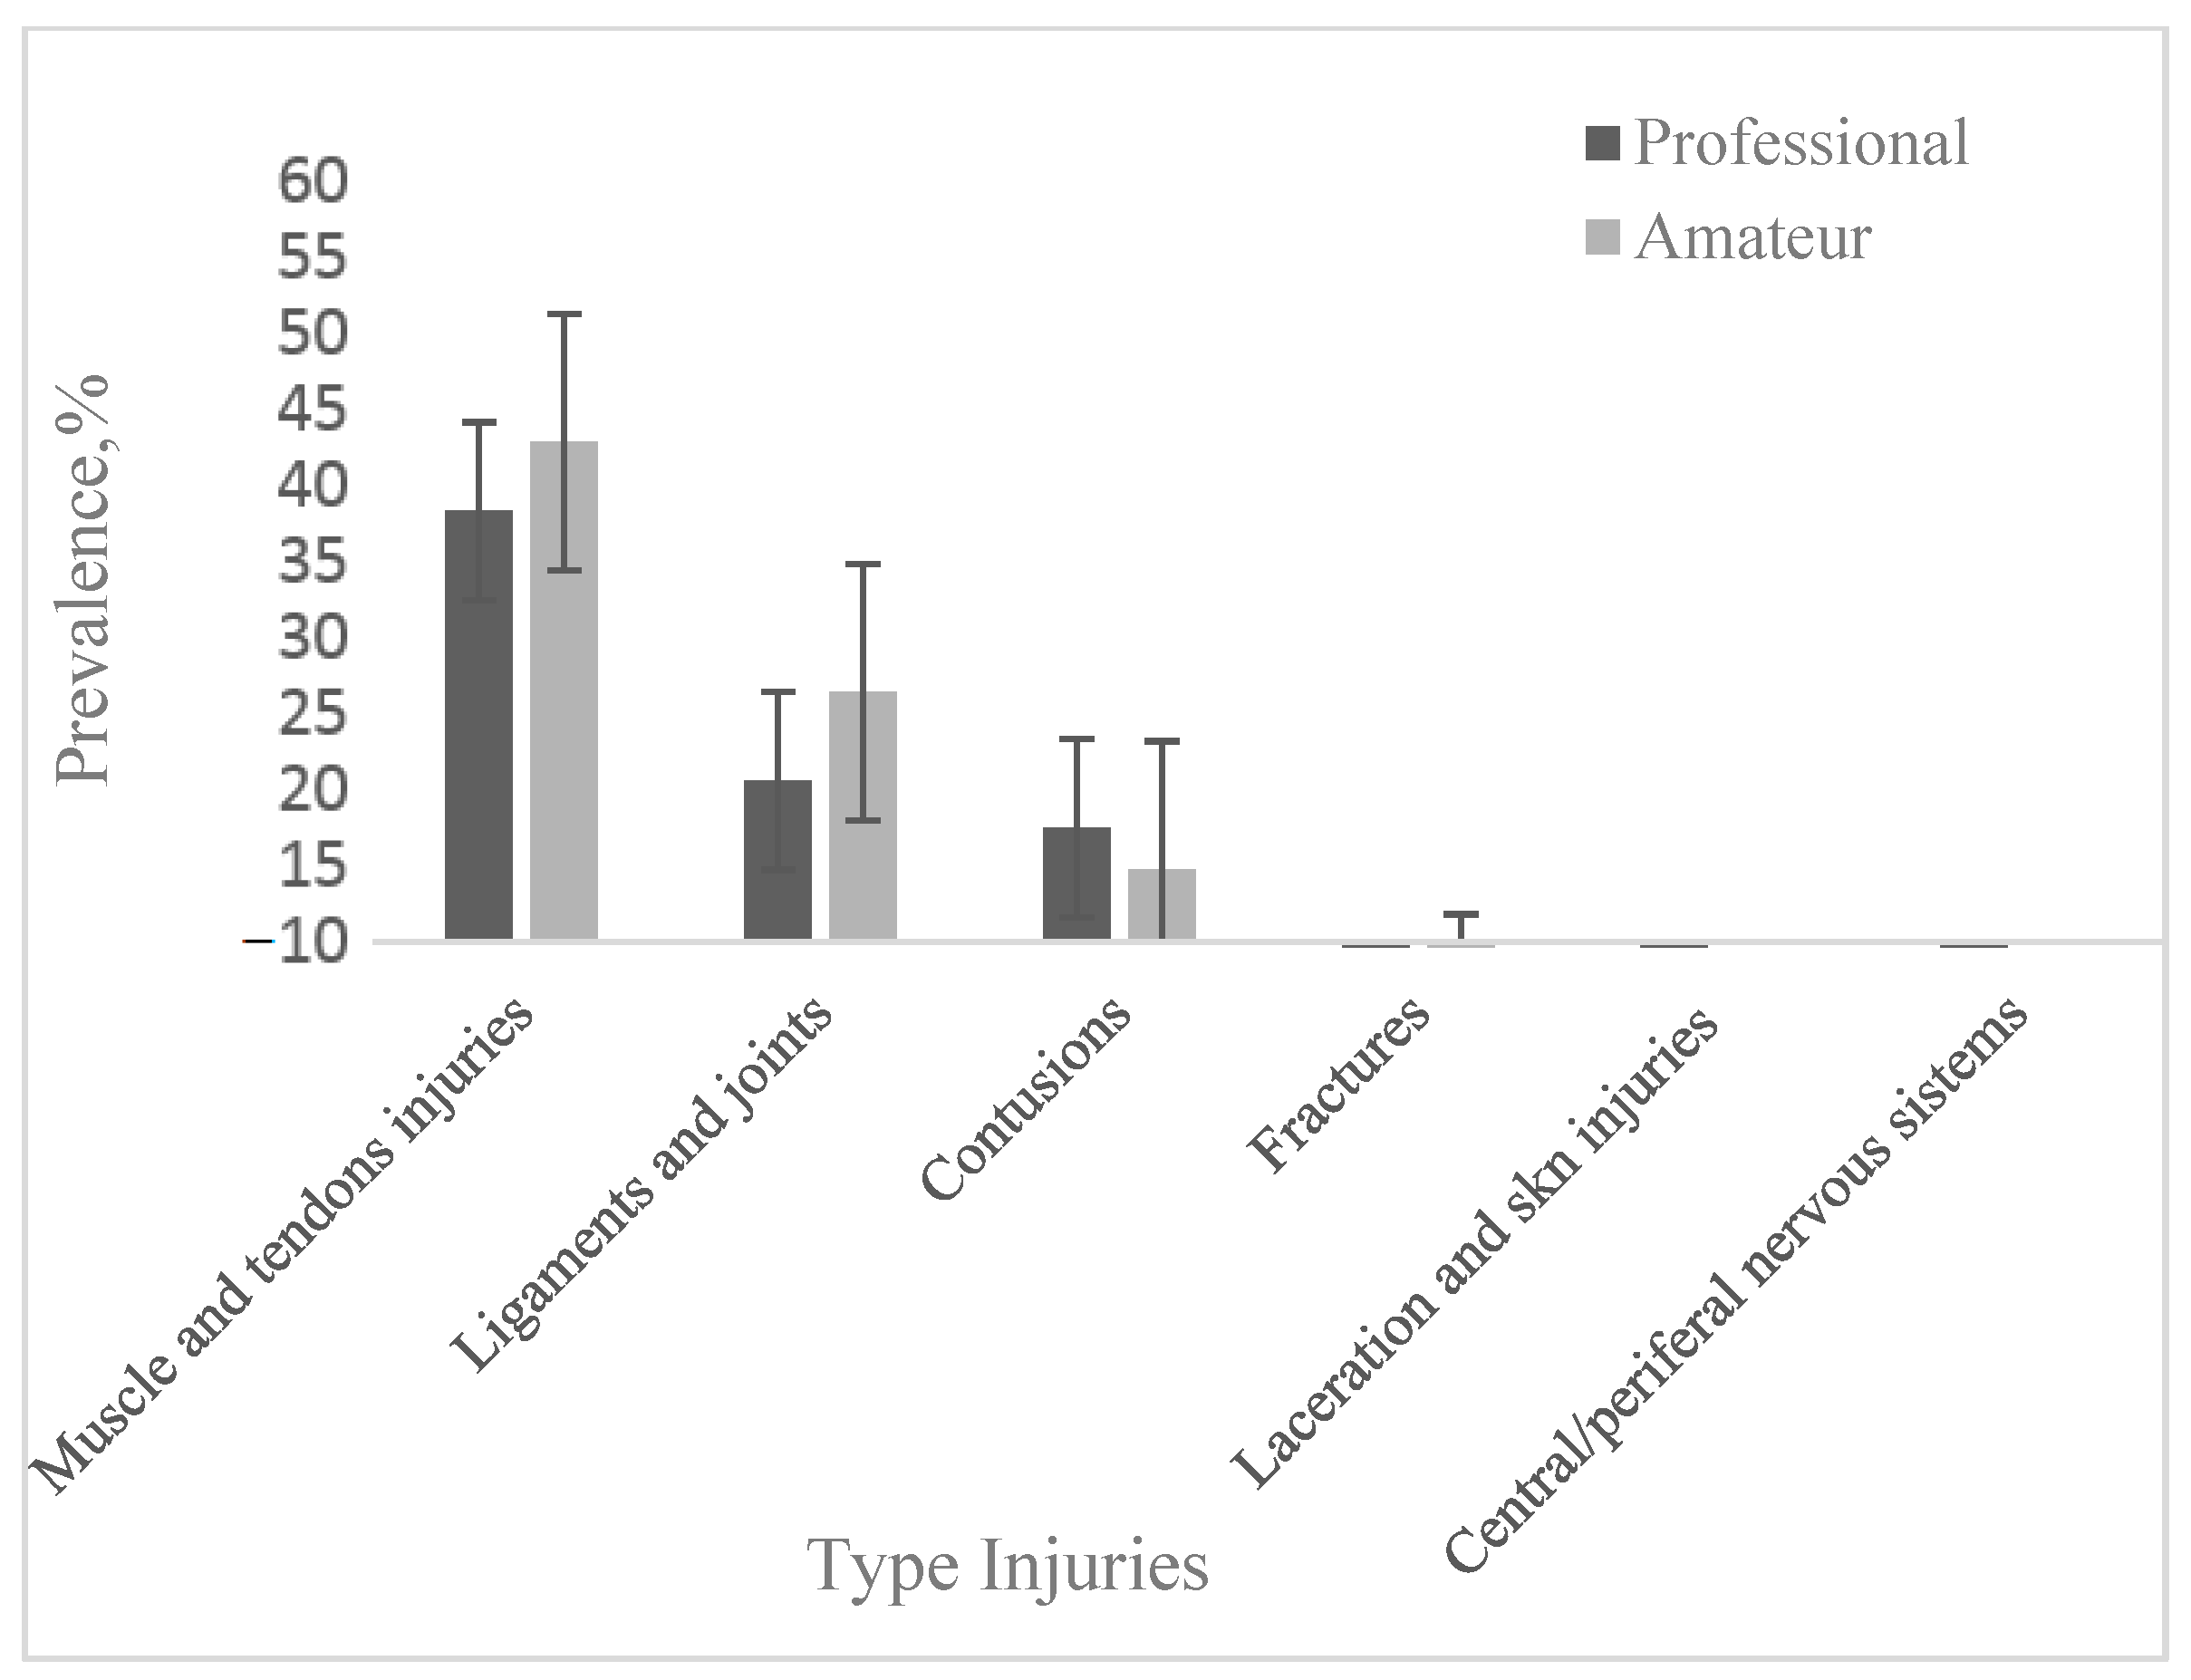 Researchers assess frequency of head injury and evaluation during 2018  World Cup